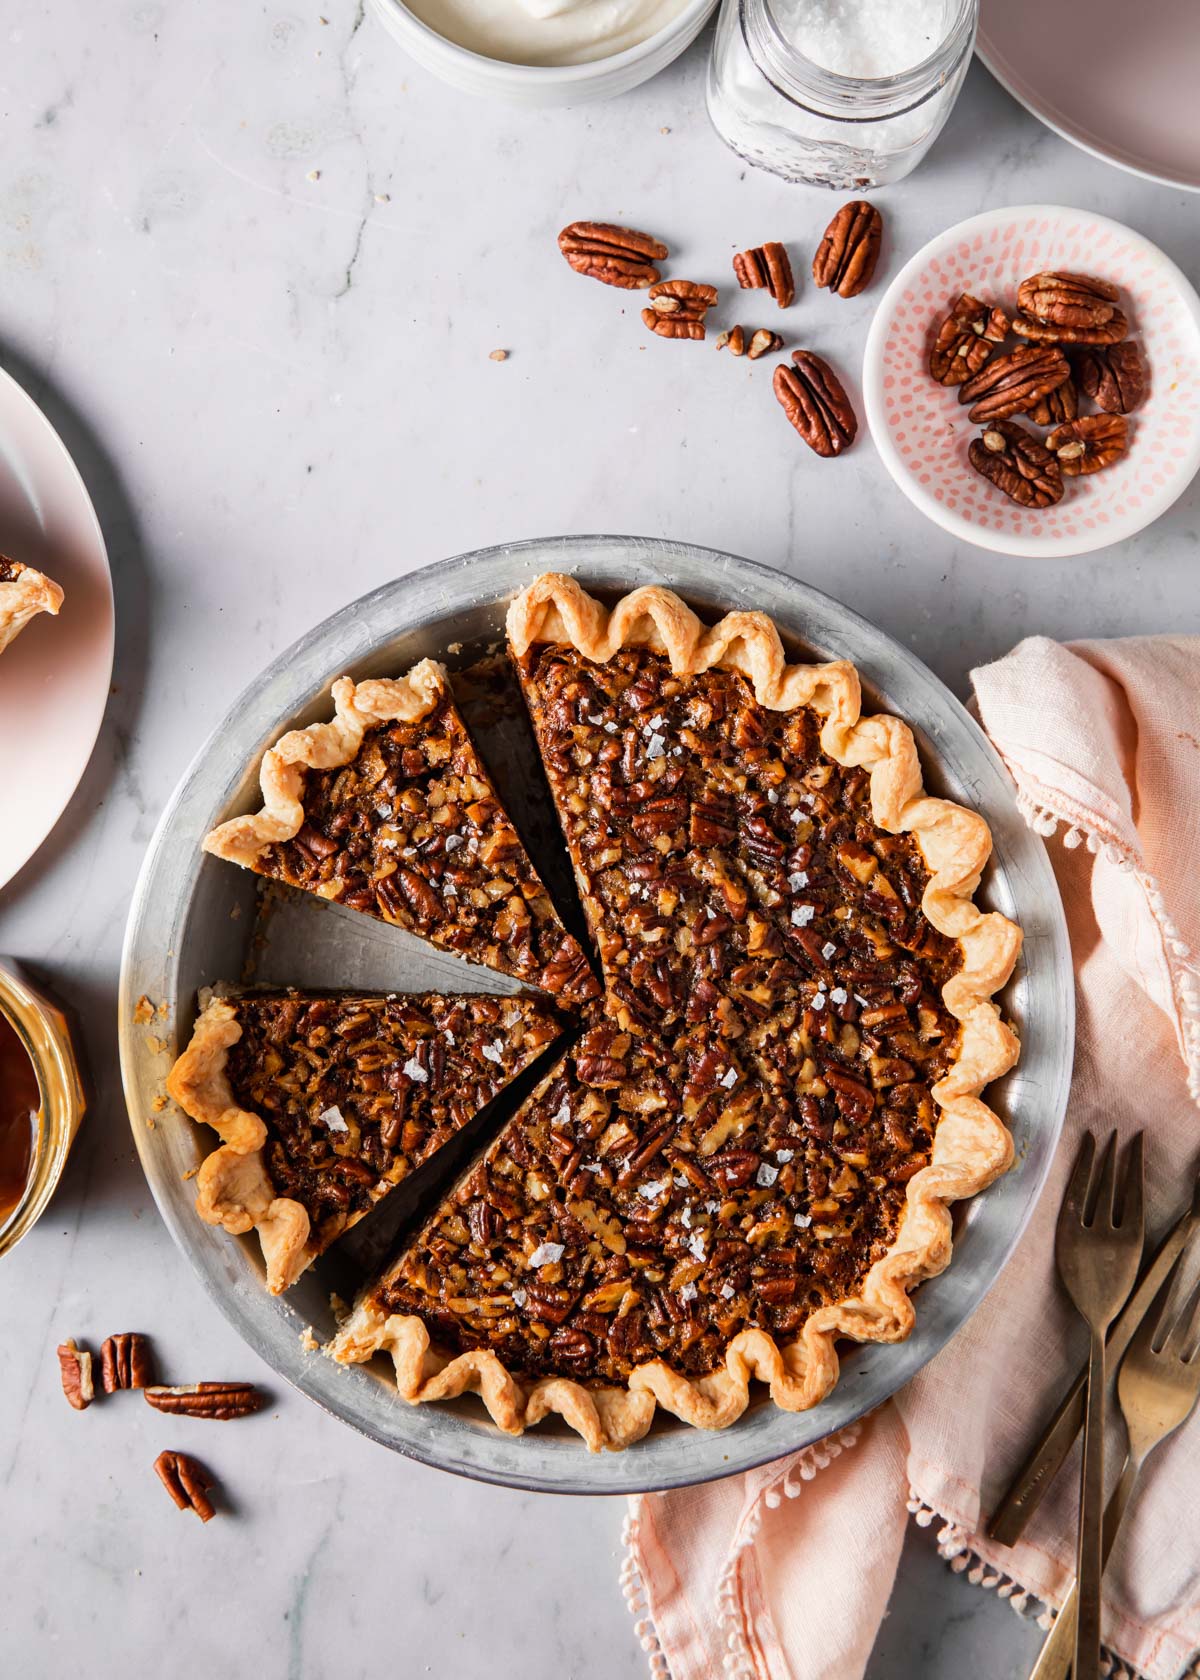 A baked pecan pie made without corn syrup